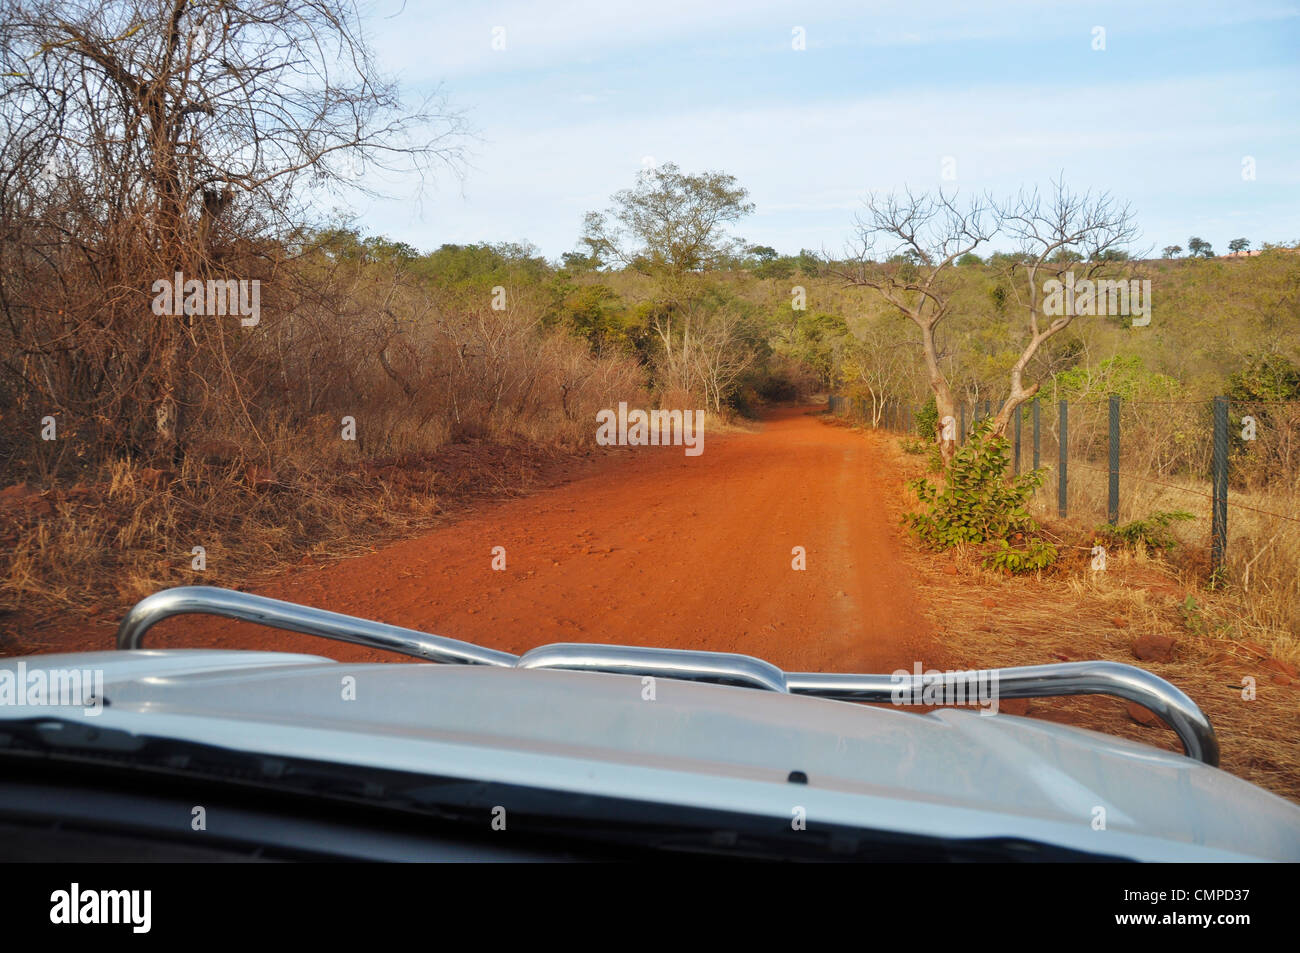 Driving a 4x4 on a laterite trail in Africa Stock Photo